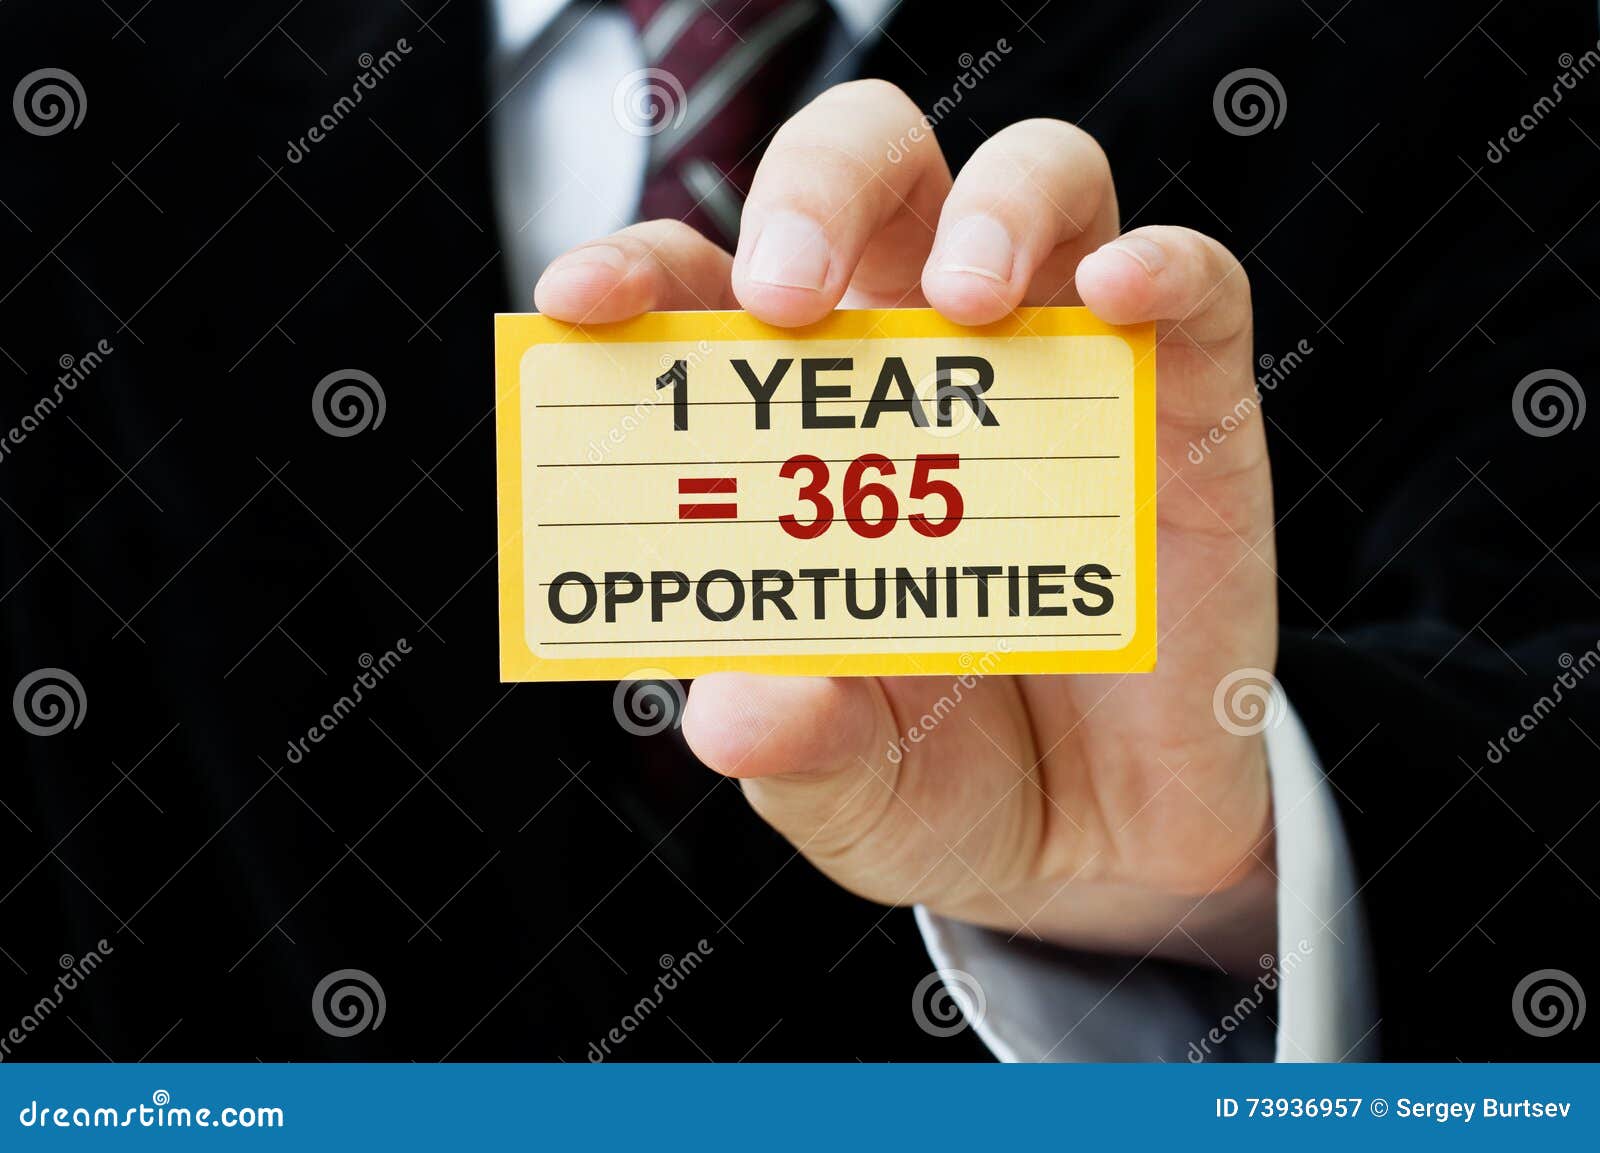 1 Year 365 Opportunities Photos Free Royalty Free Stock Photos From Dreamstime